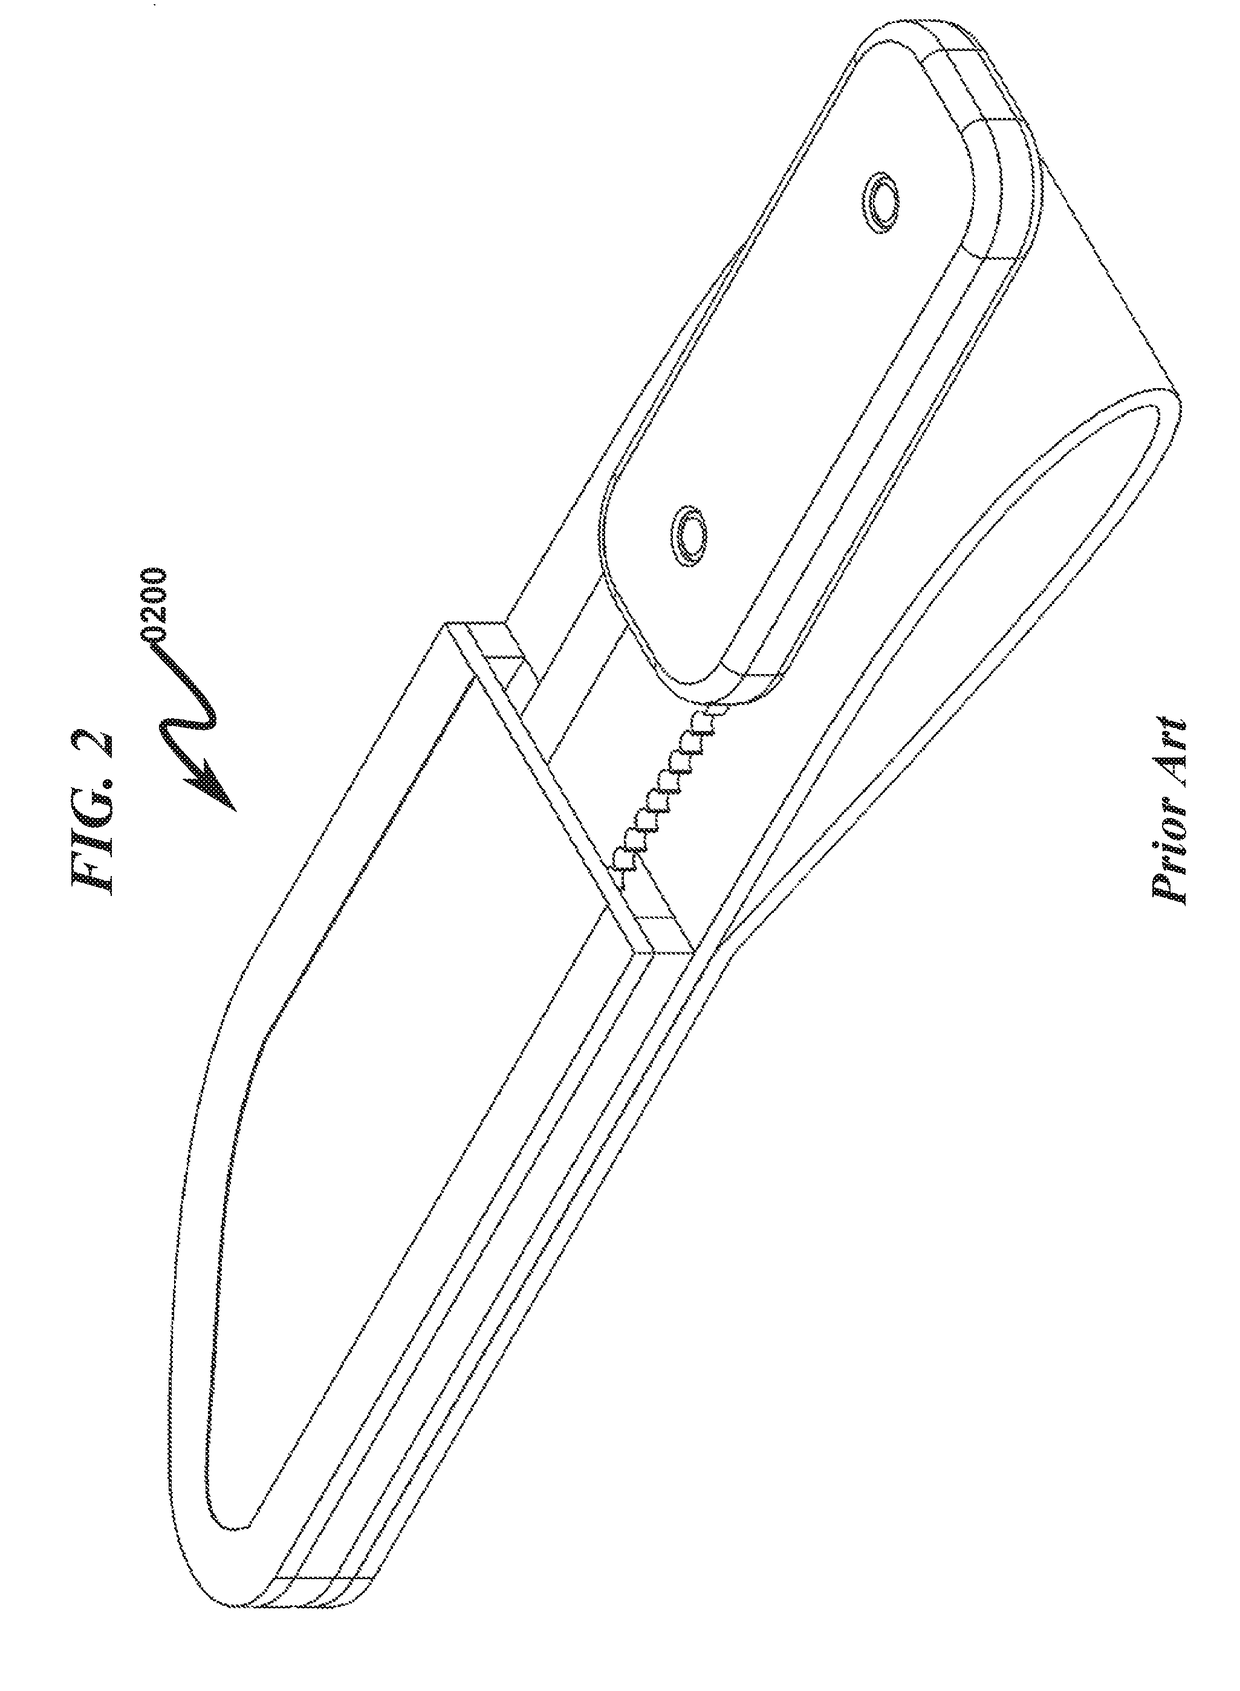 Knife storage system and method